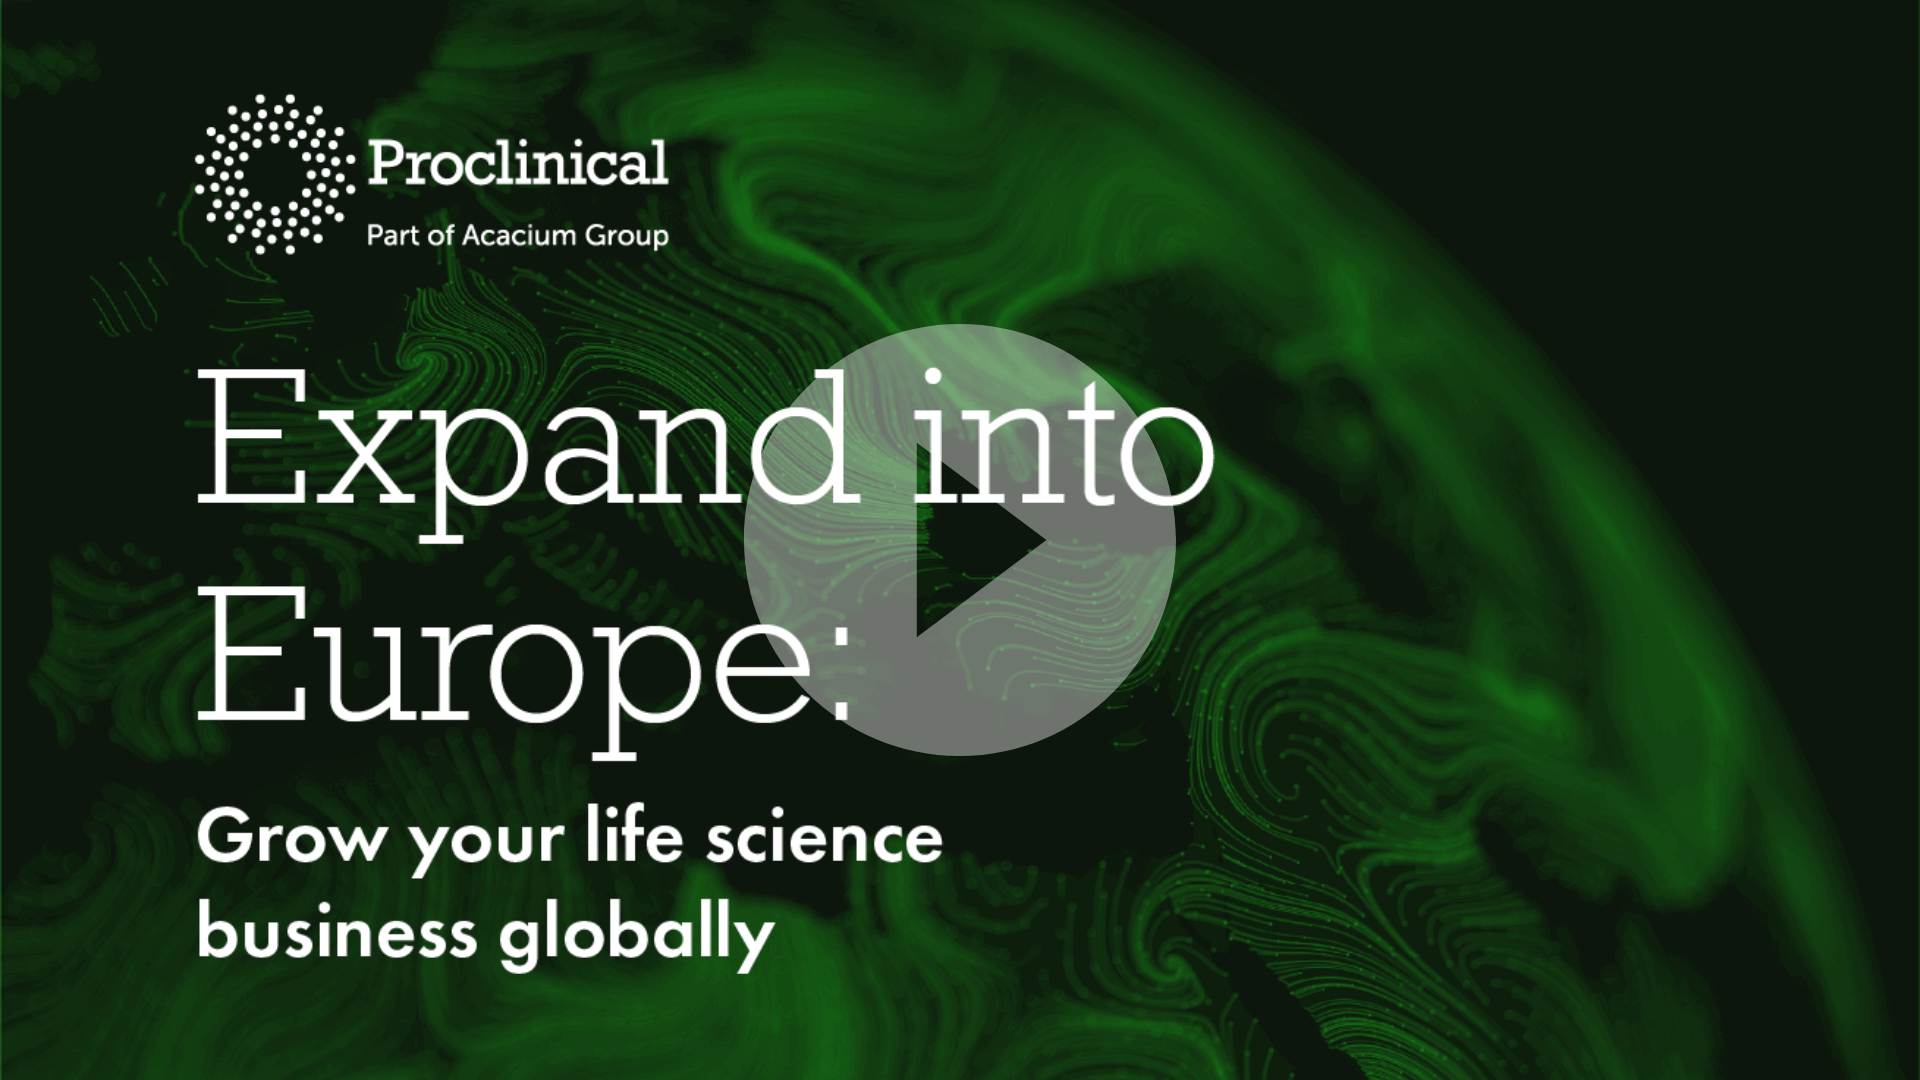 Webinar replay: Expand into Europe - Grow your life science business globally